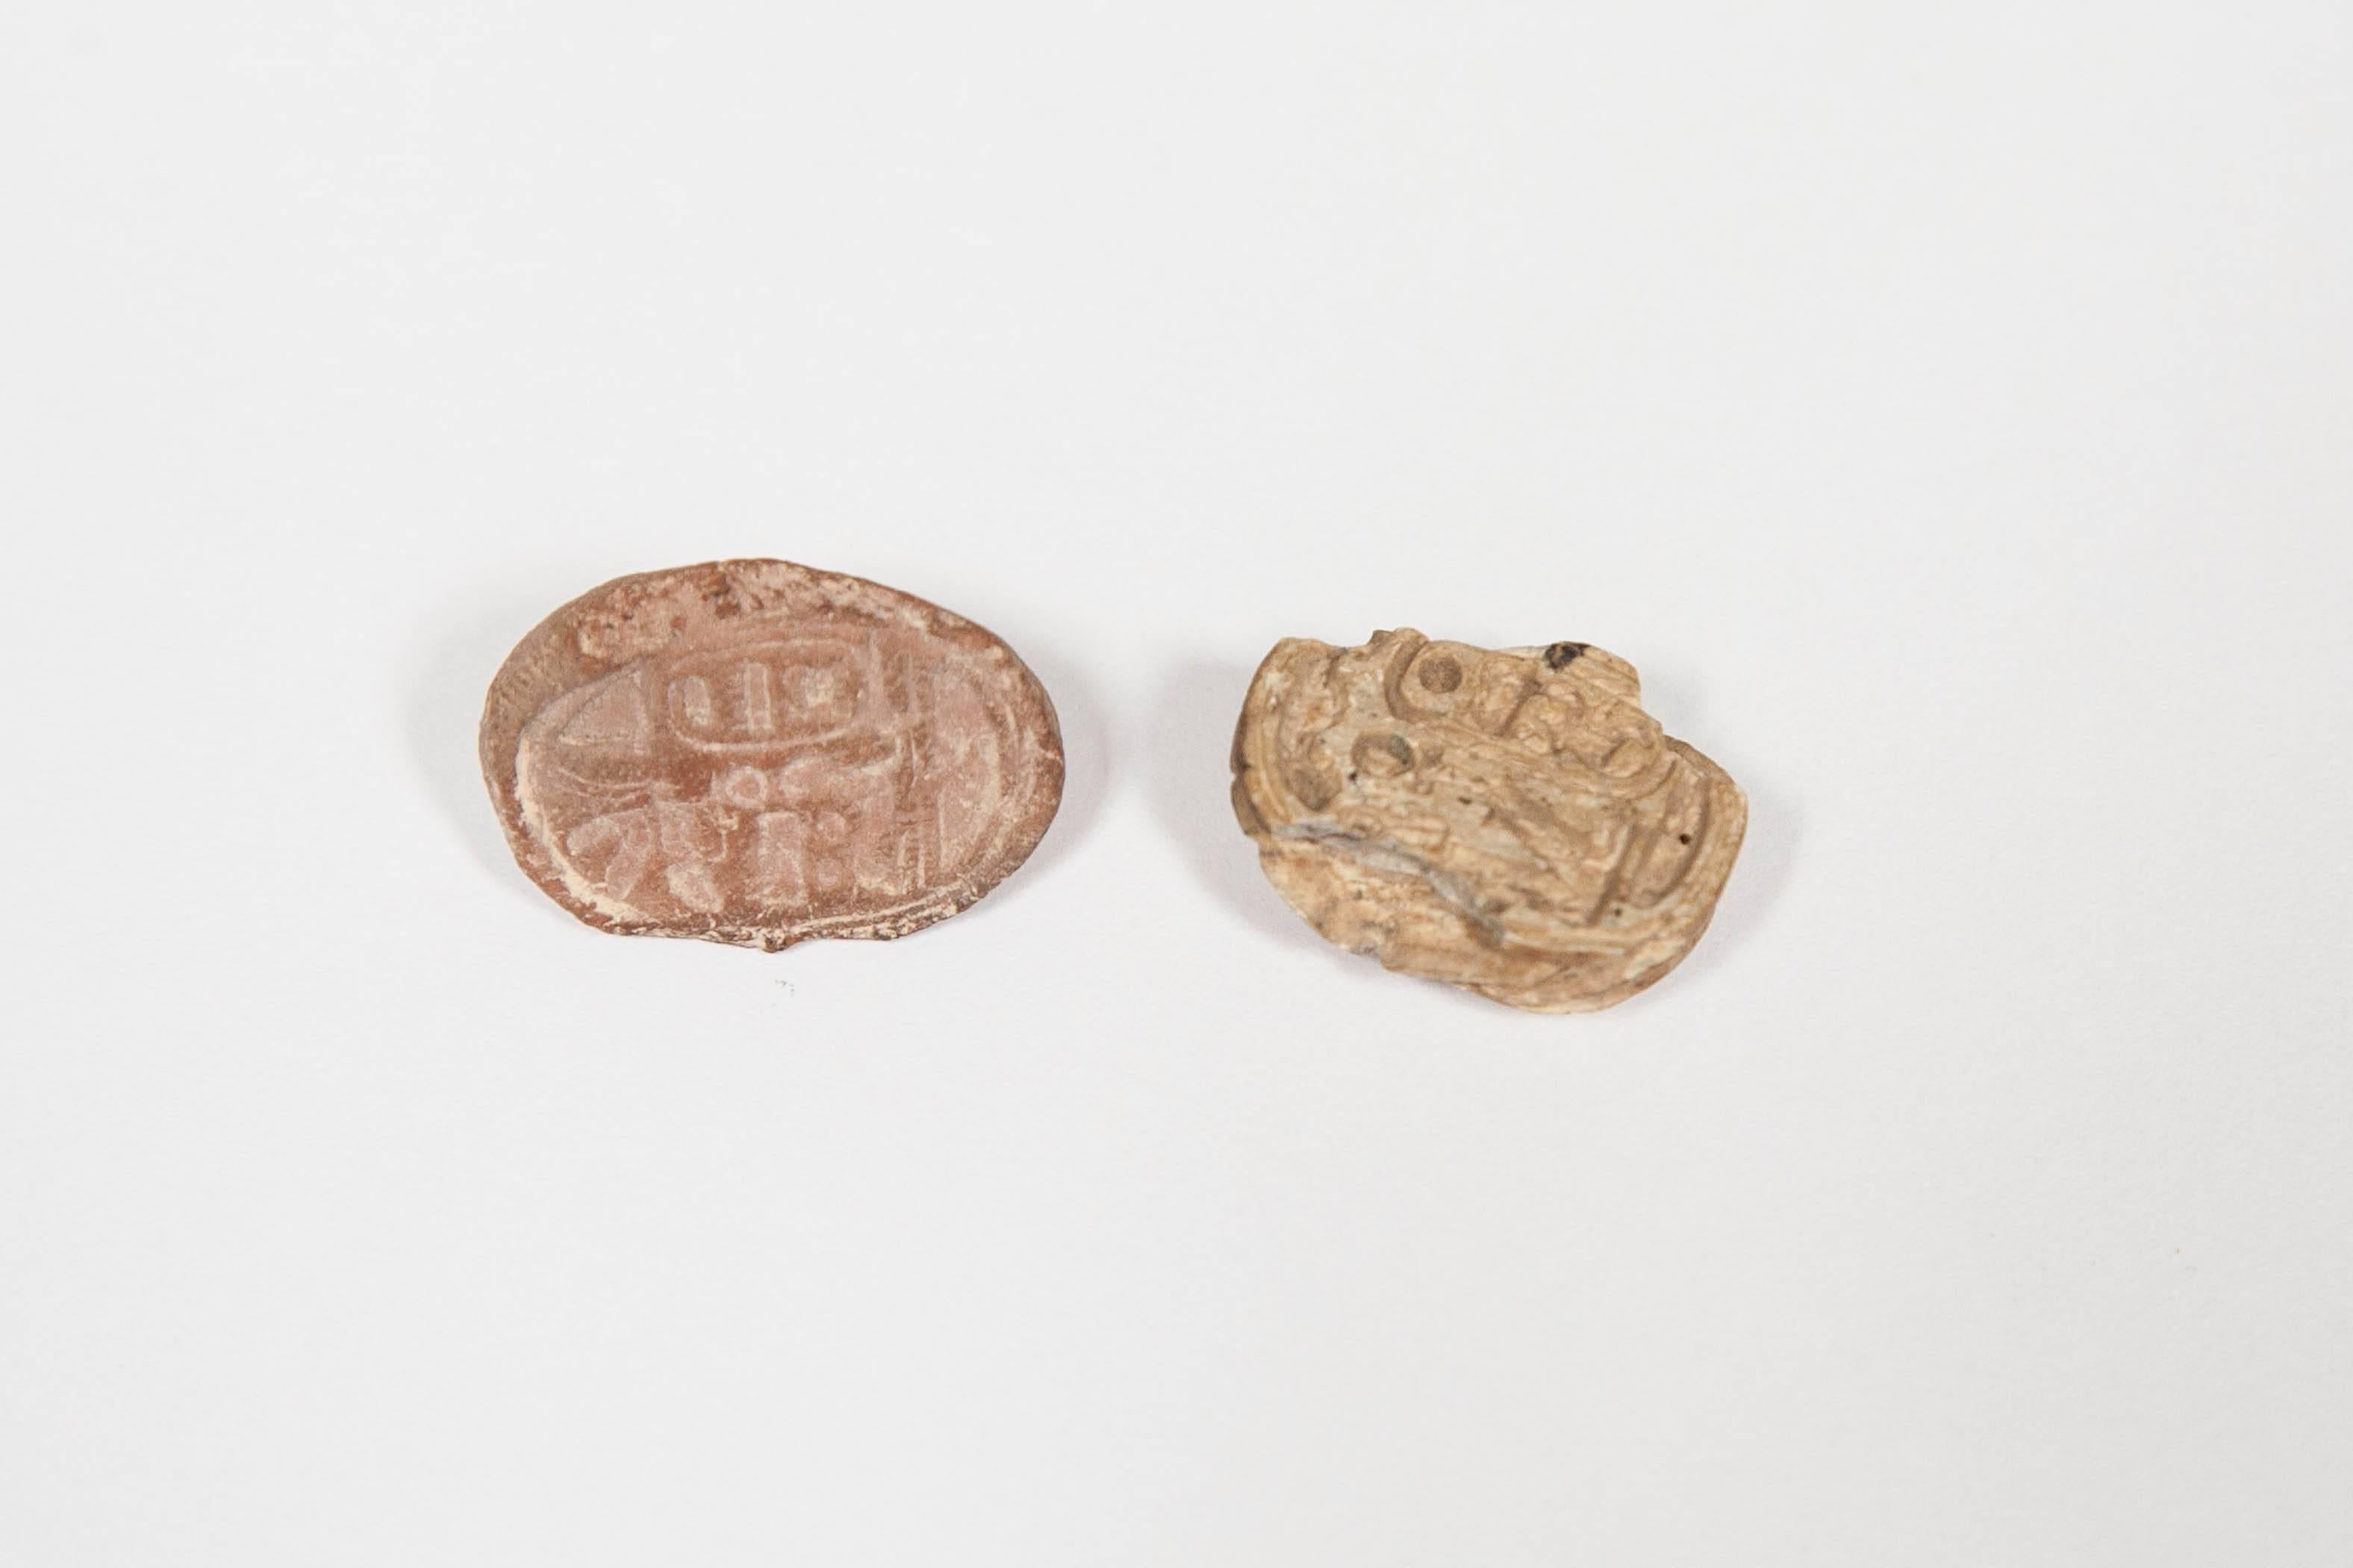 A collection of ancient Egyptian burial scarabs. These miniature carved scarabs were placed in the tombs as burial offerings.
